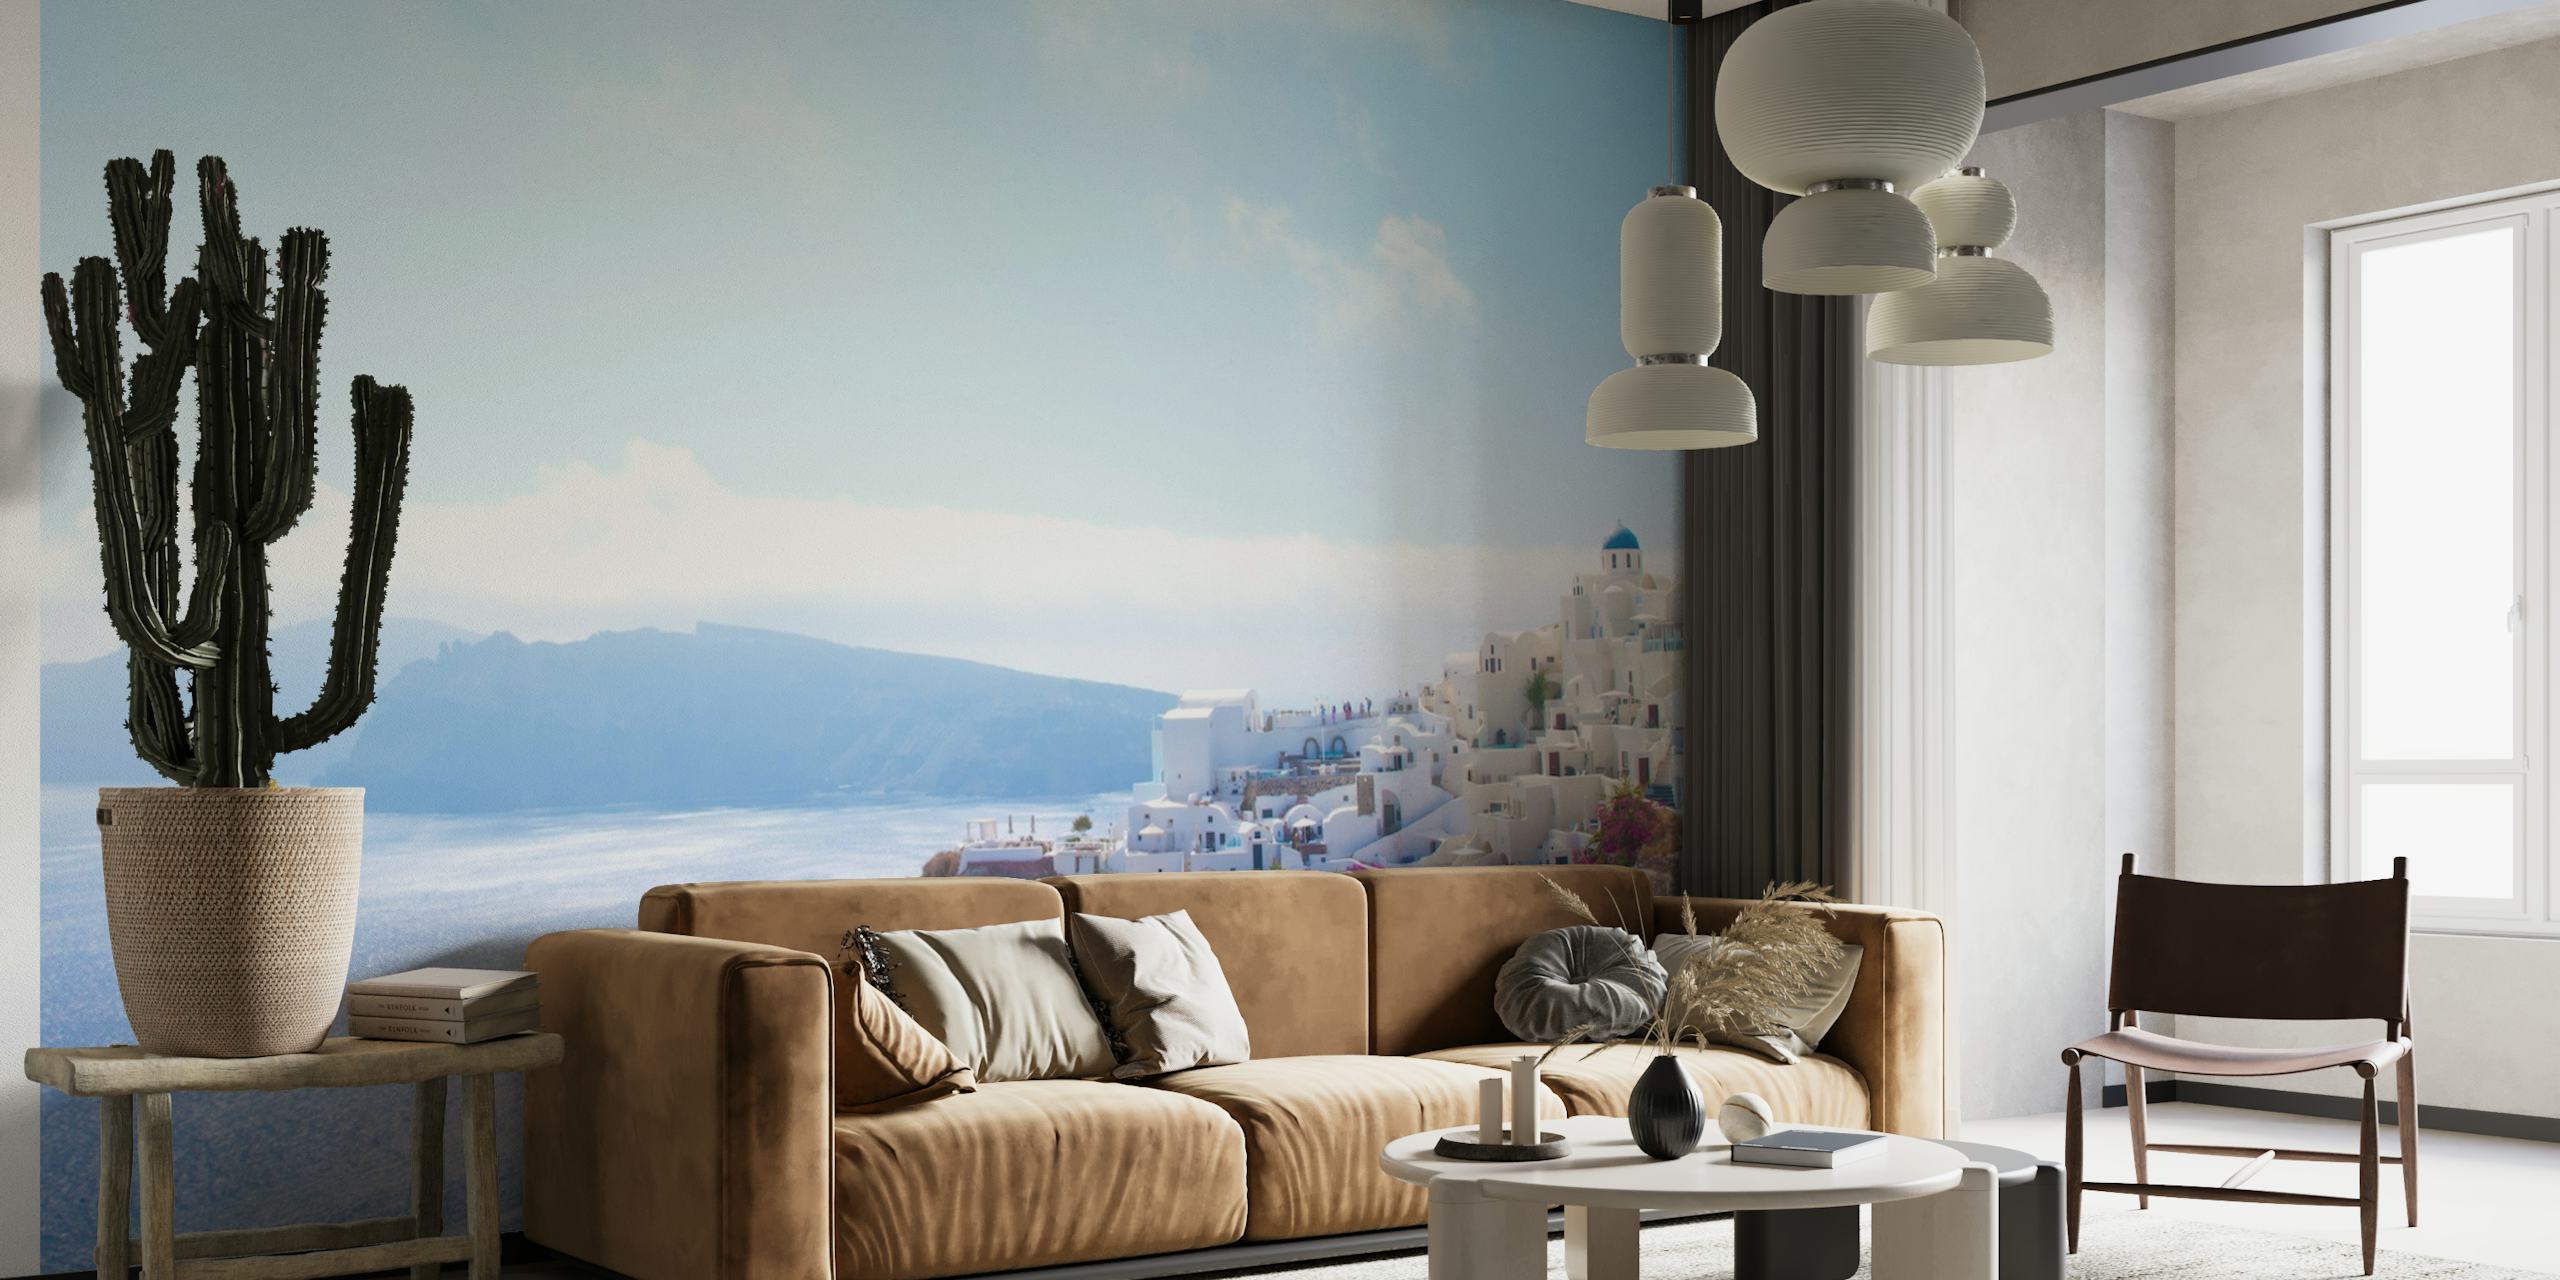 Santorini island wall mural with whitewashed buildings and blue domes overlooking the sea